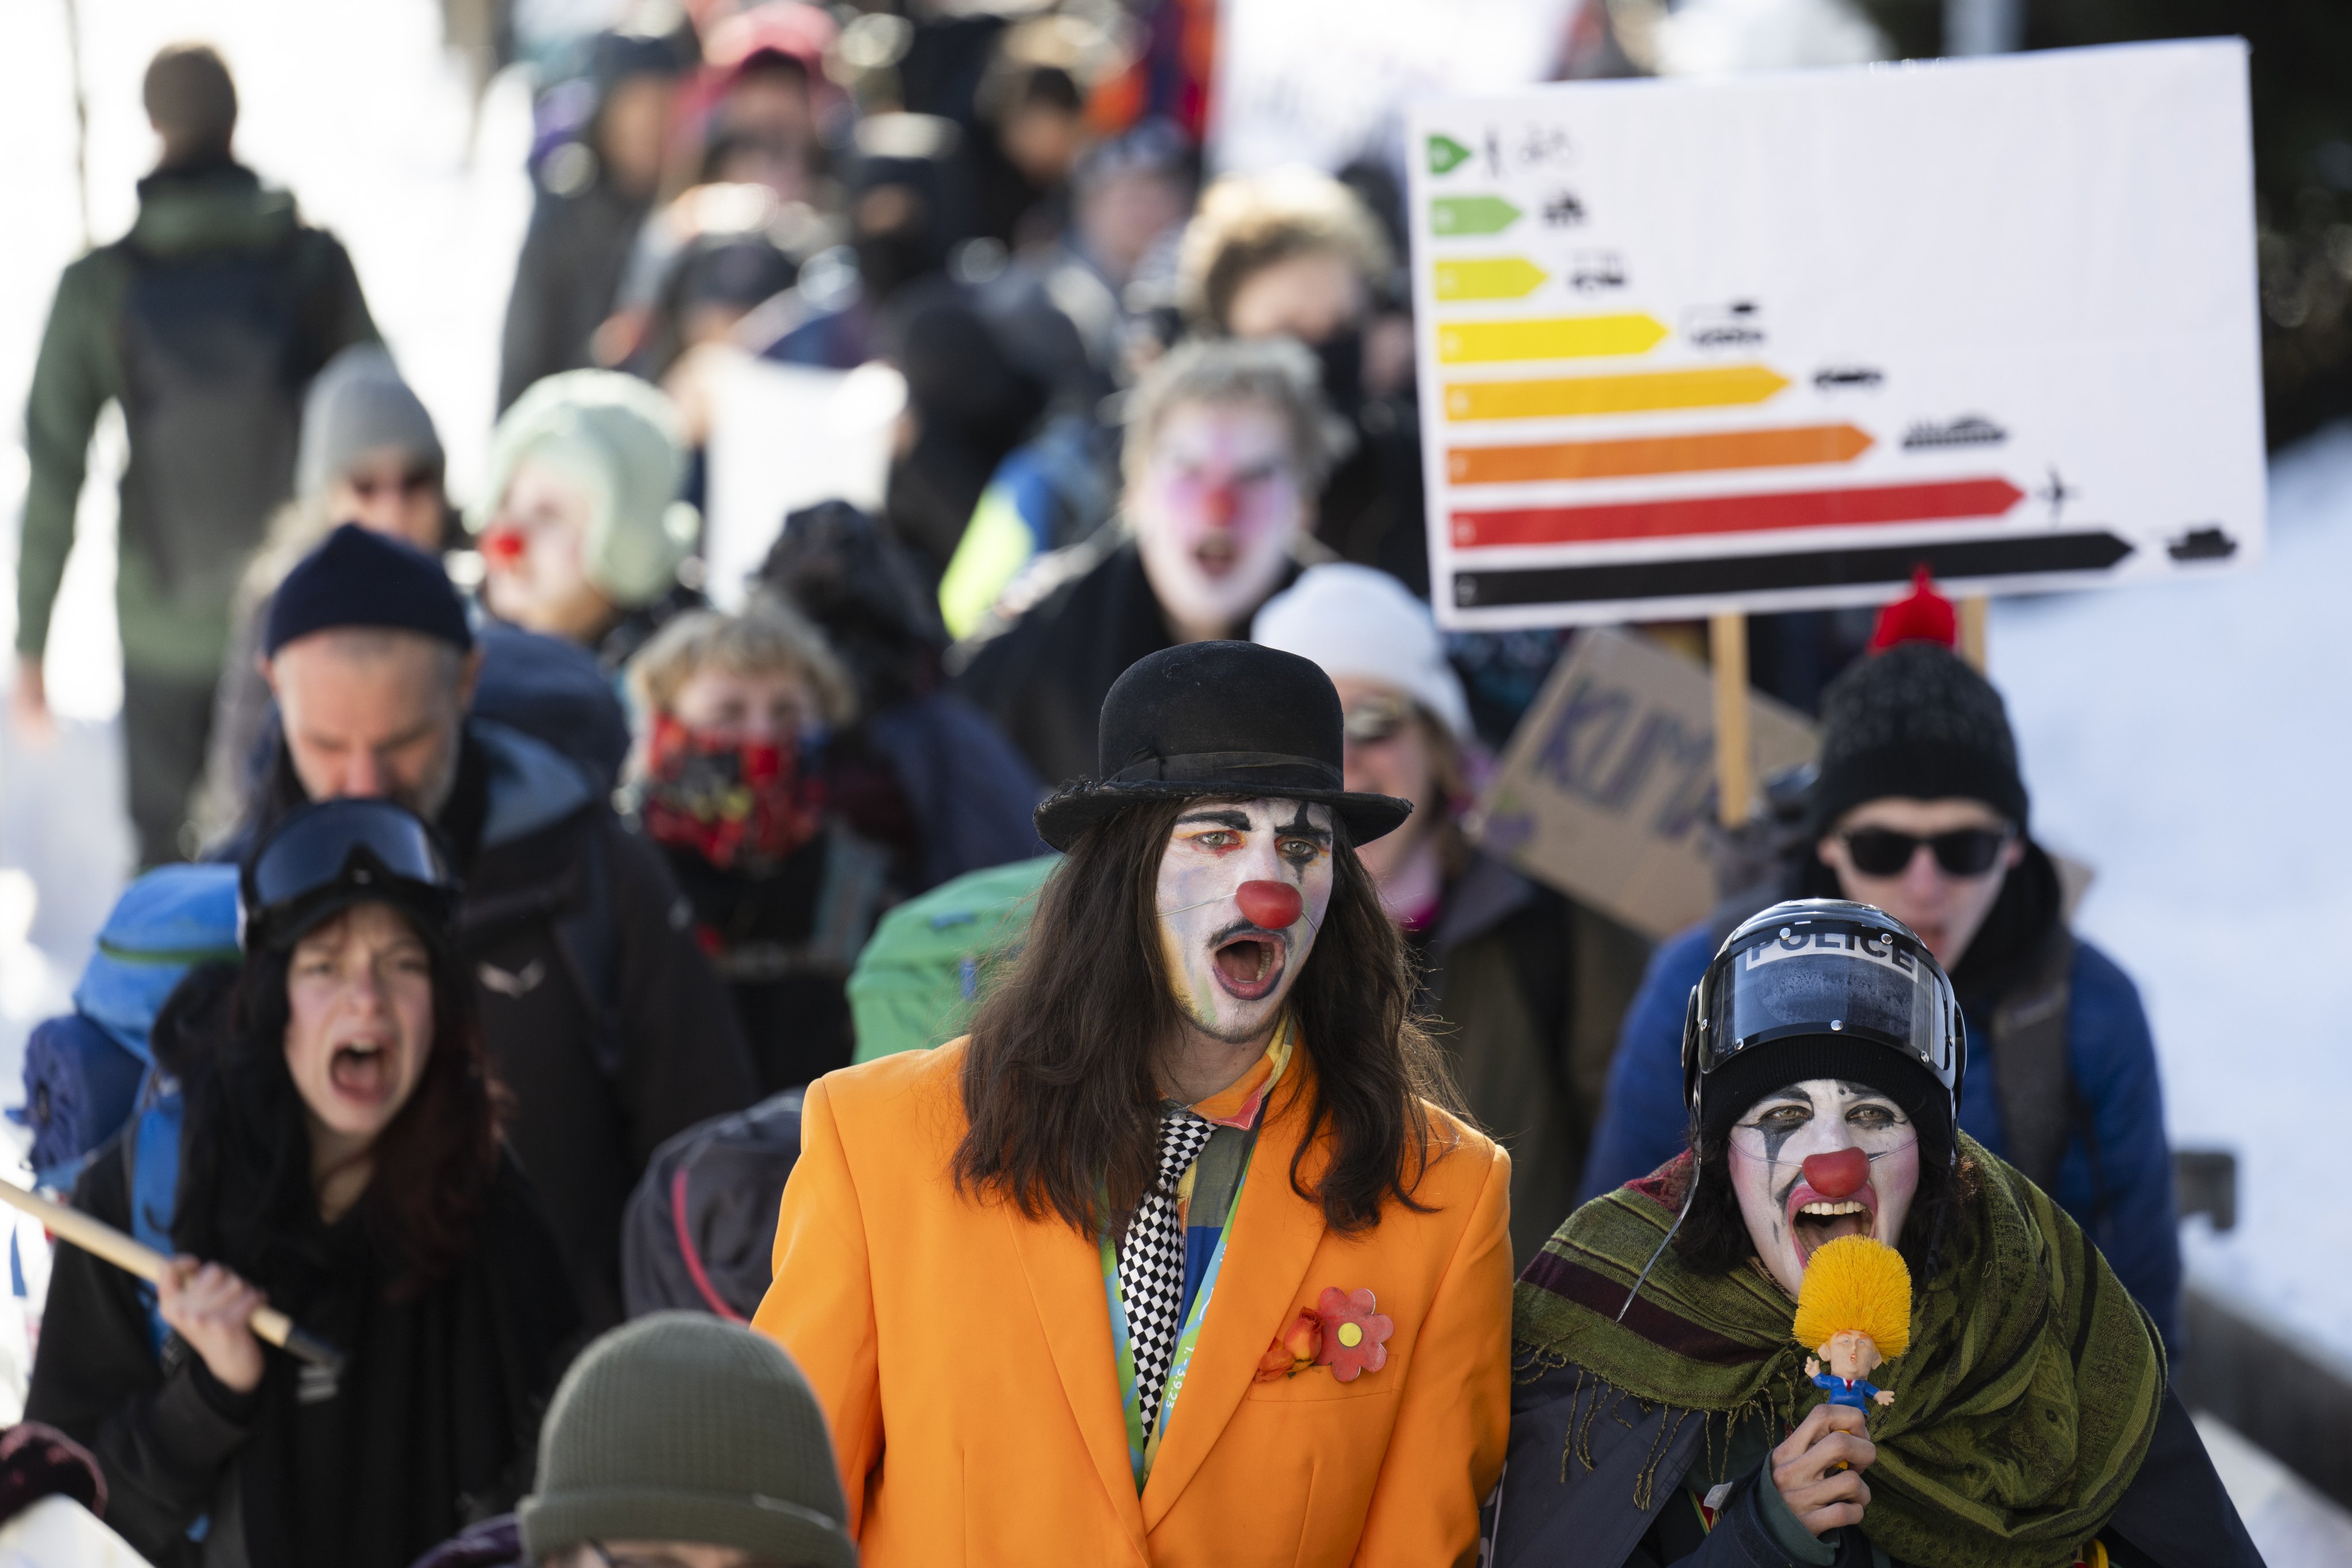 Demonstrators in clown costumes at the 54th World Economic Forum in Davos, Switzerland, on January 14,  where the theme was Rebuilding Trust. Photo: EPA-EFE